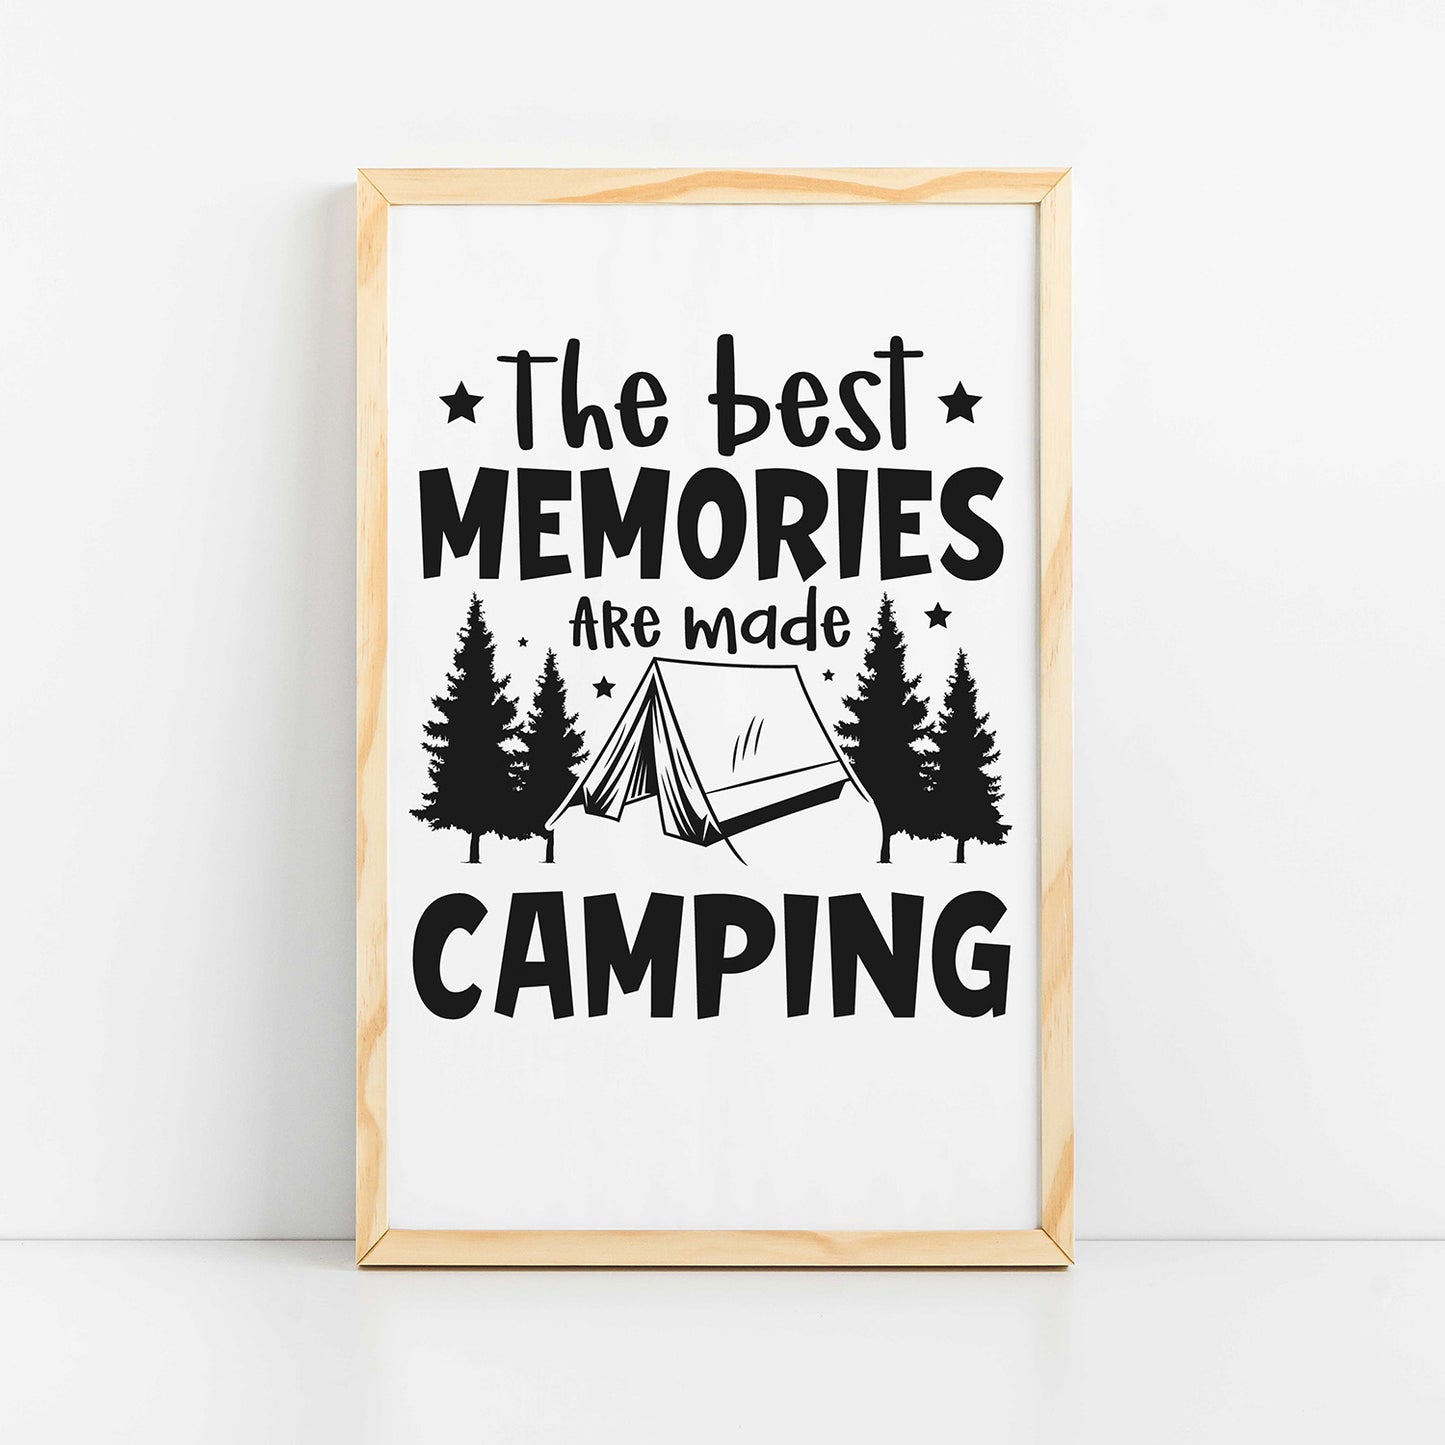 "The Best Memories Are Made Camping" Graphic